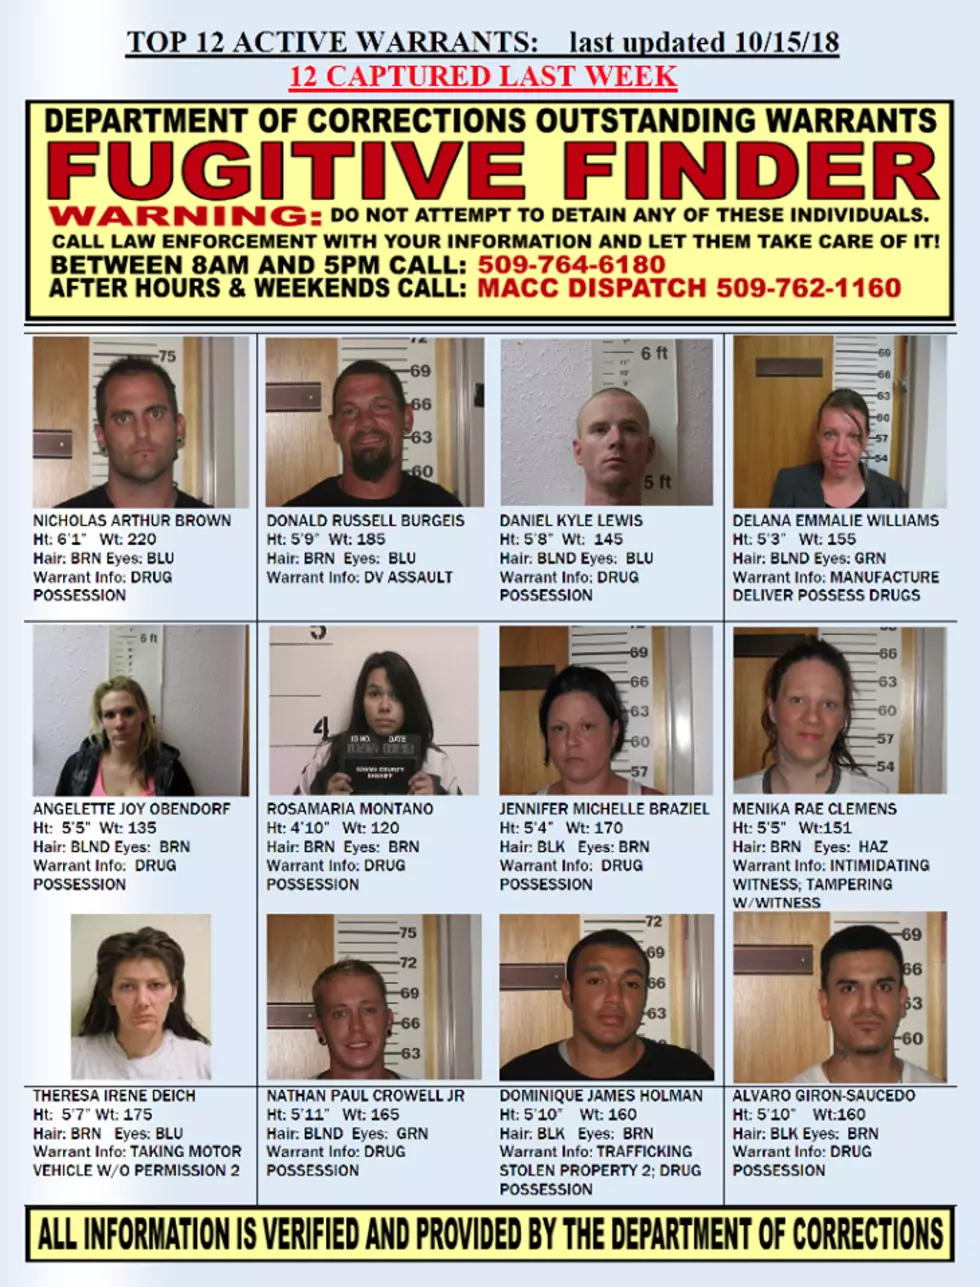 This Week’s Fugitive Finder from Department of Corrections